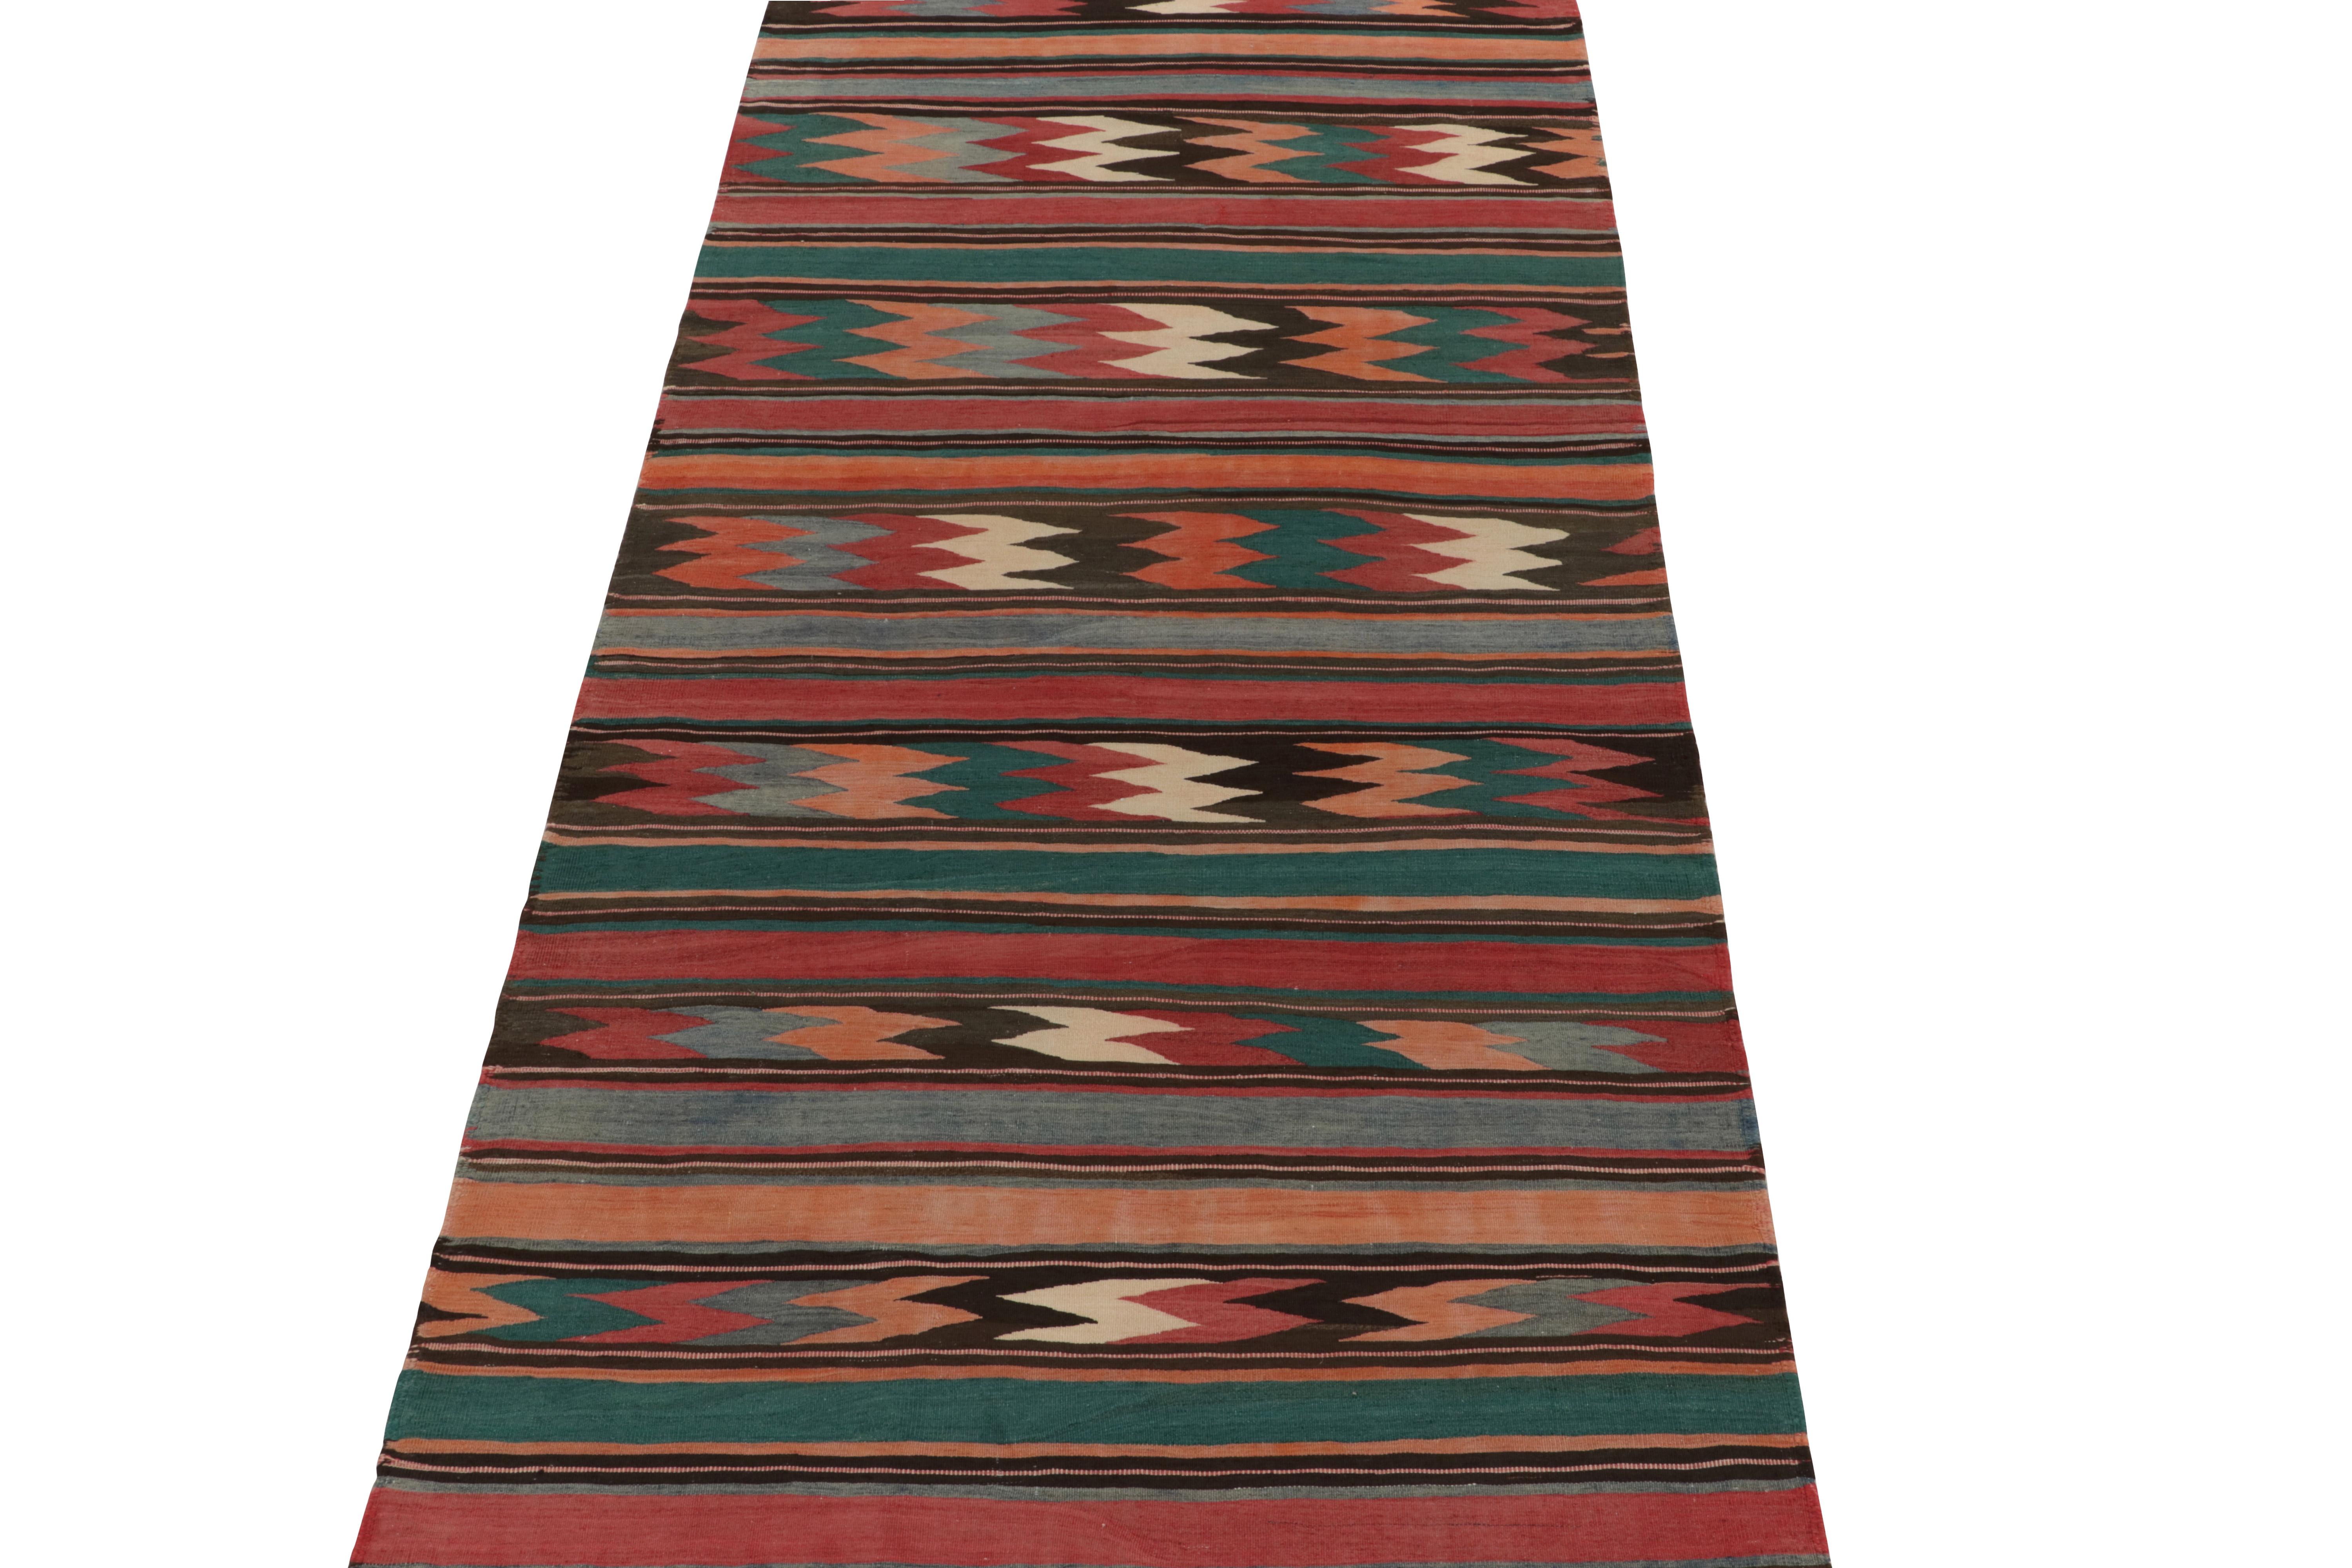 Coming from Turkey circa 1950s, a 5x11 mid-century tribal Kilim now entering R&K’s vintage flat weave selections. 

Distinguished for both its size and vibrant colorways among flat weaves of the 1950s, the piece carries a unique attitude and a